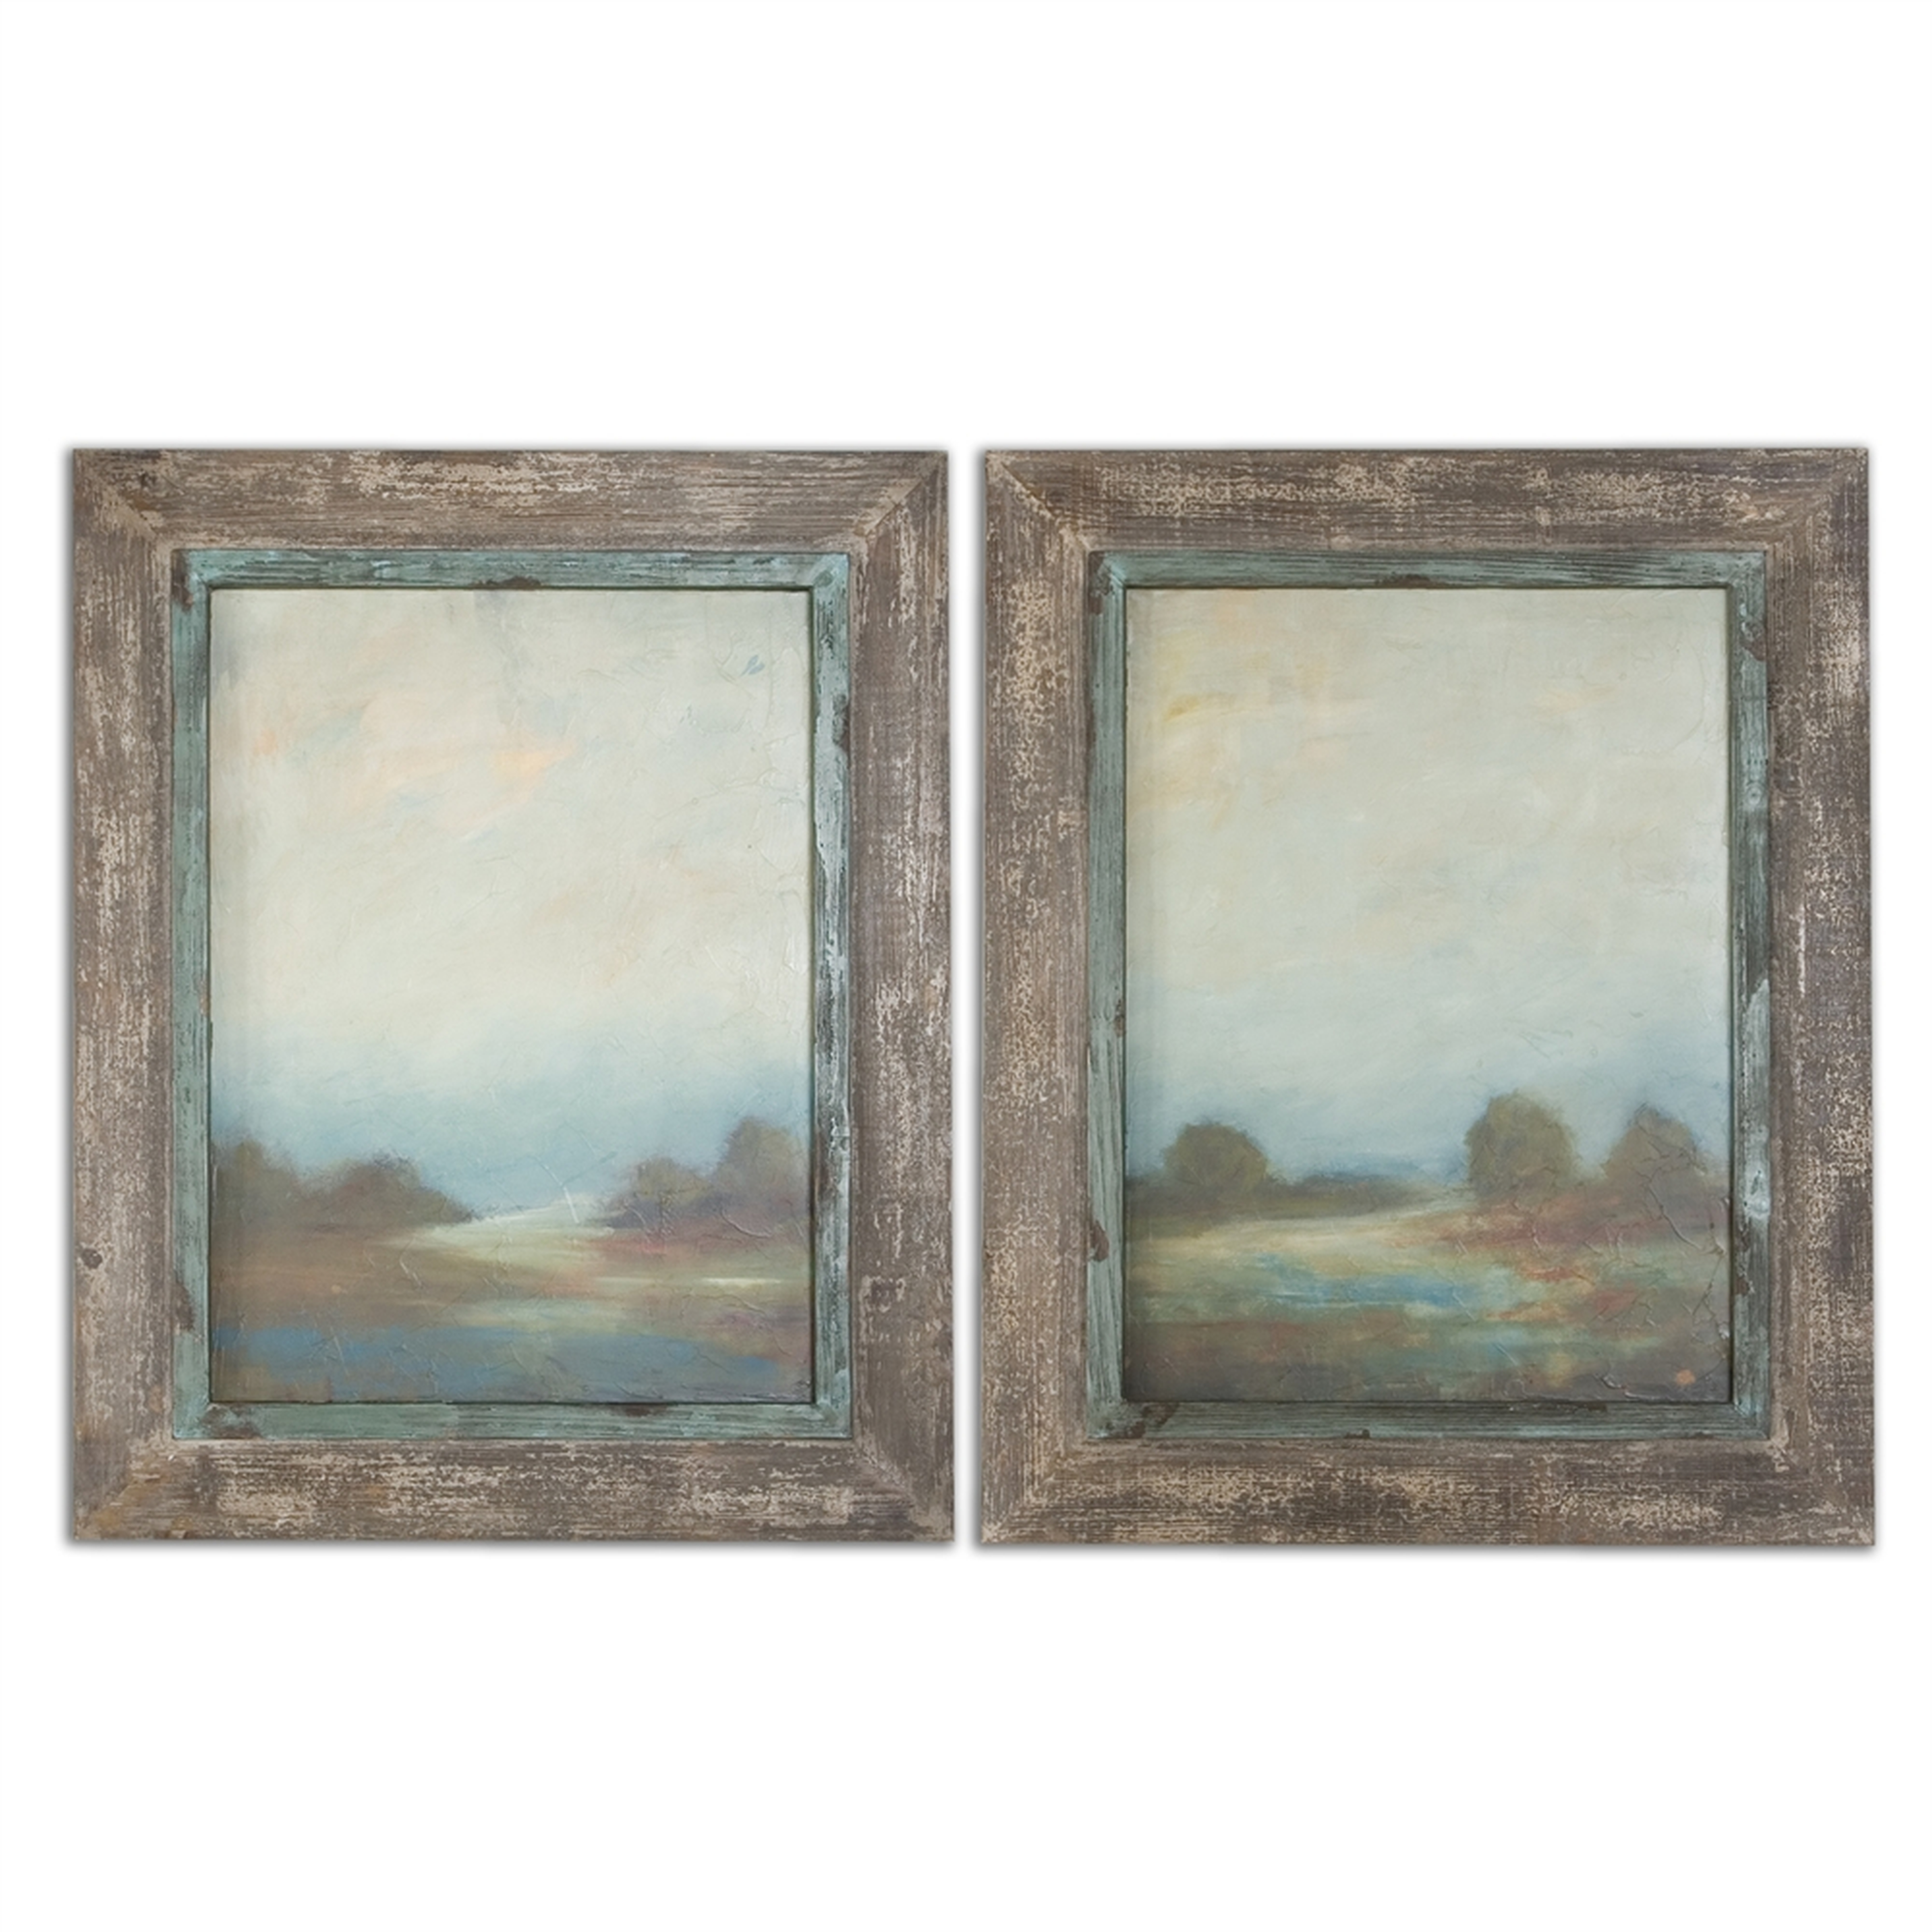 Morning Vistas, S/2 - 25 W X 31 H (in) - Framed - Without mat - Hudsonhill Foundry